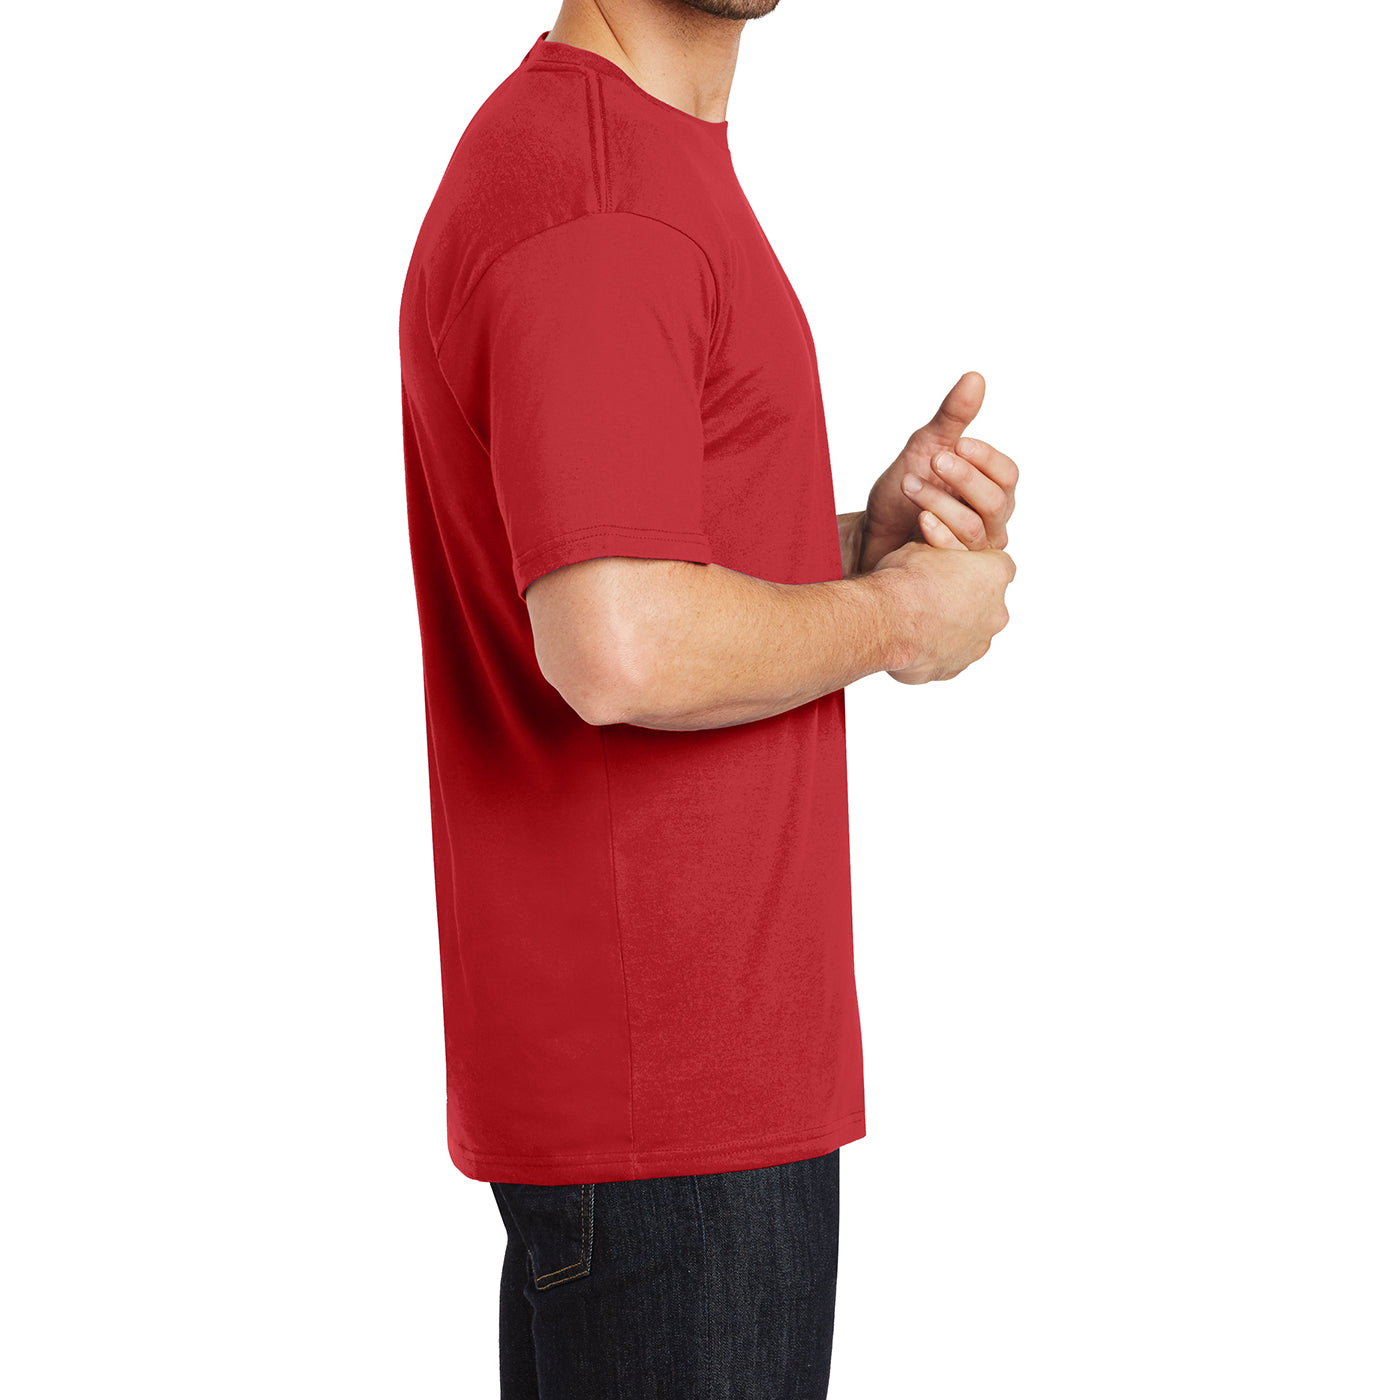 Mens Perfect Weight Crew Tee - Classic Red - Side